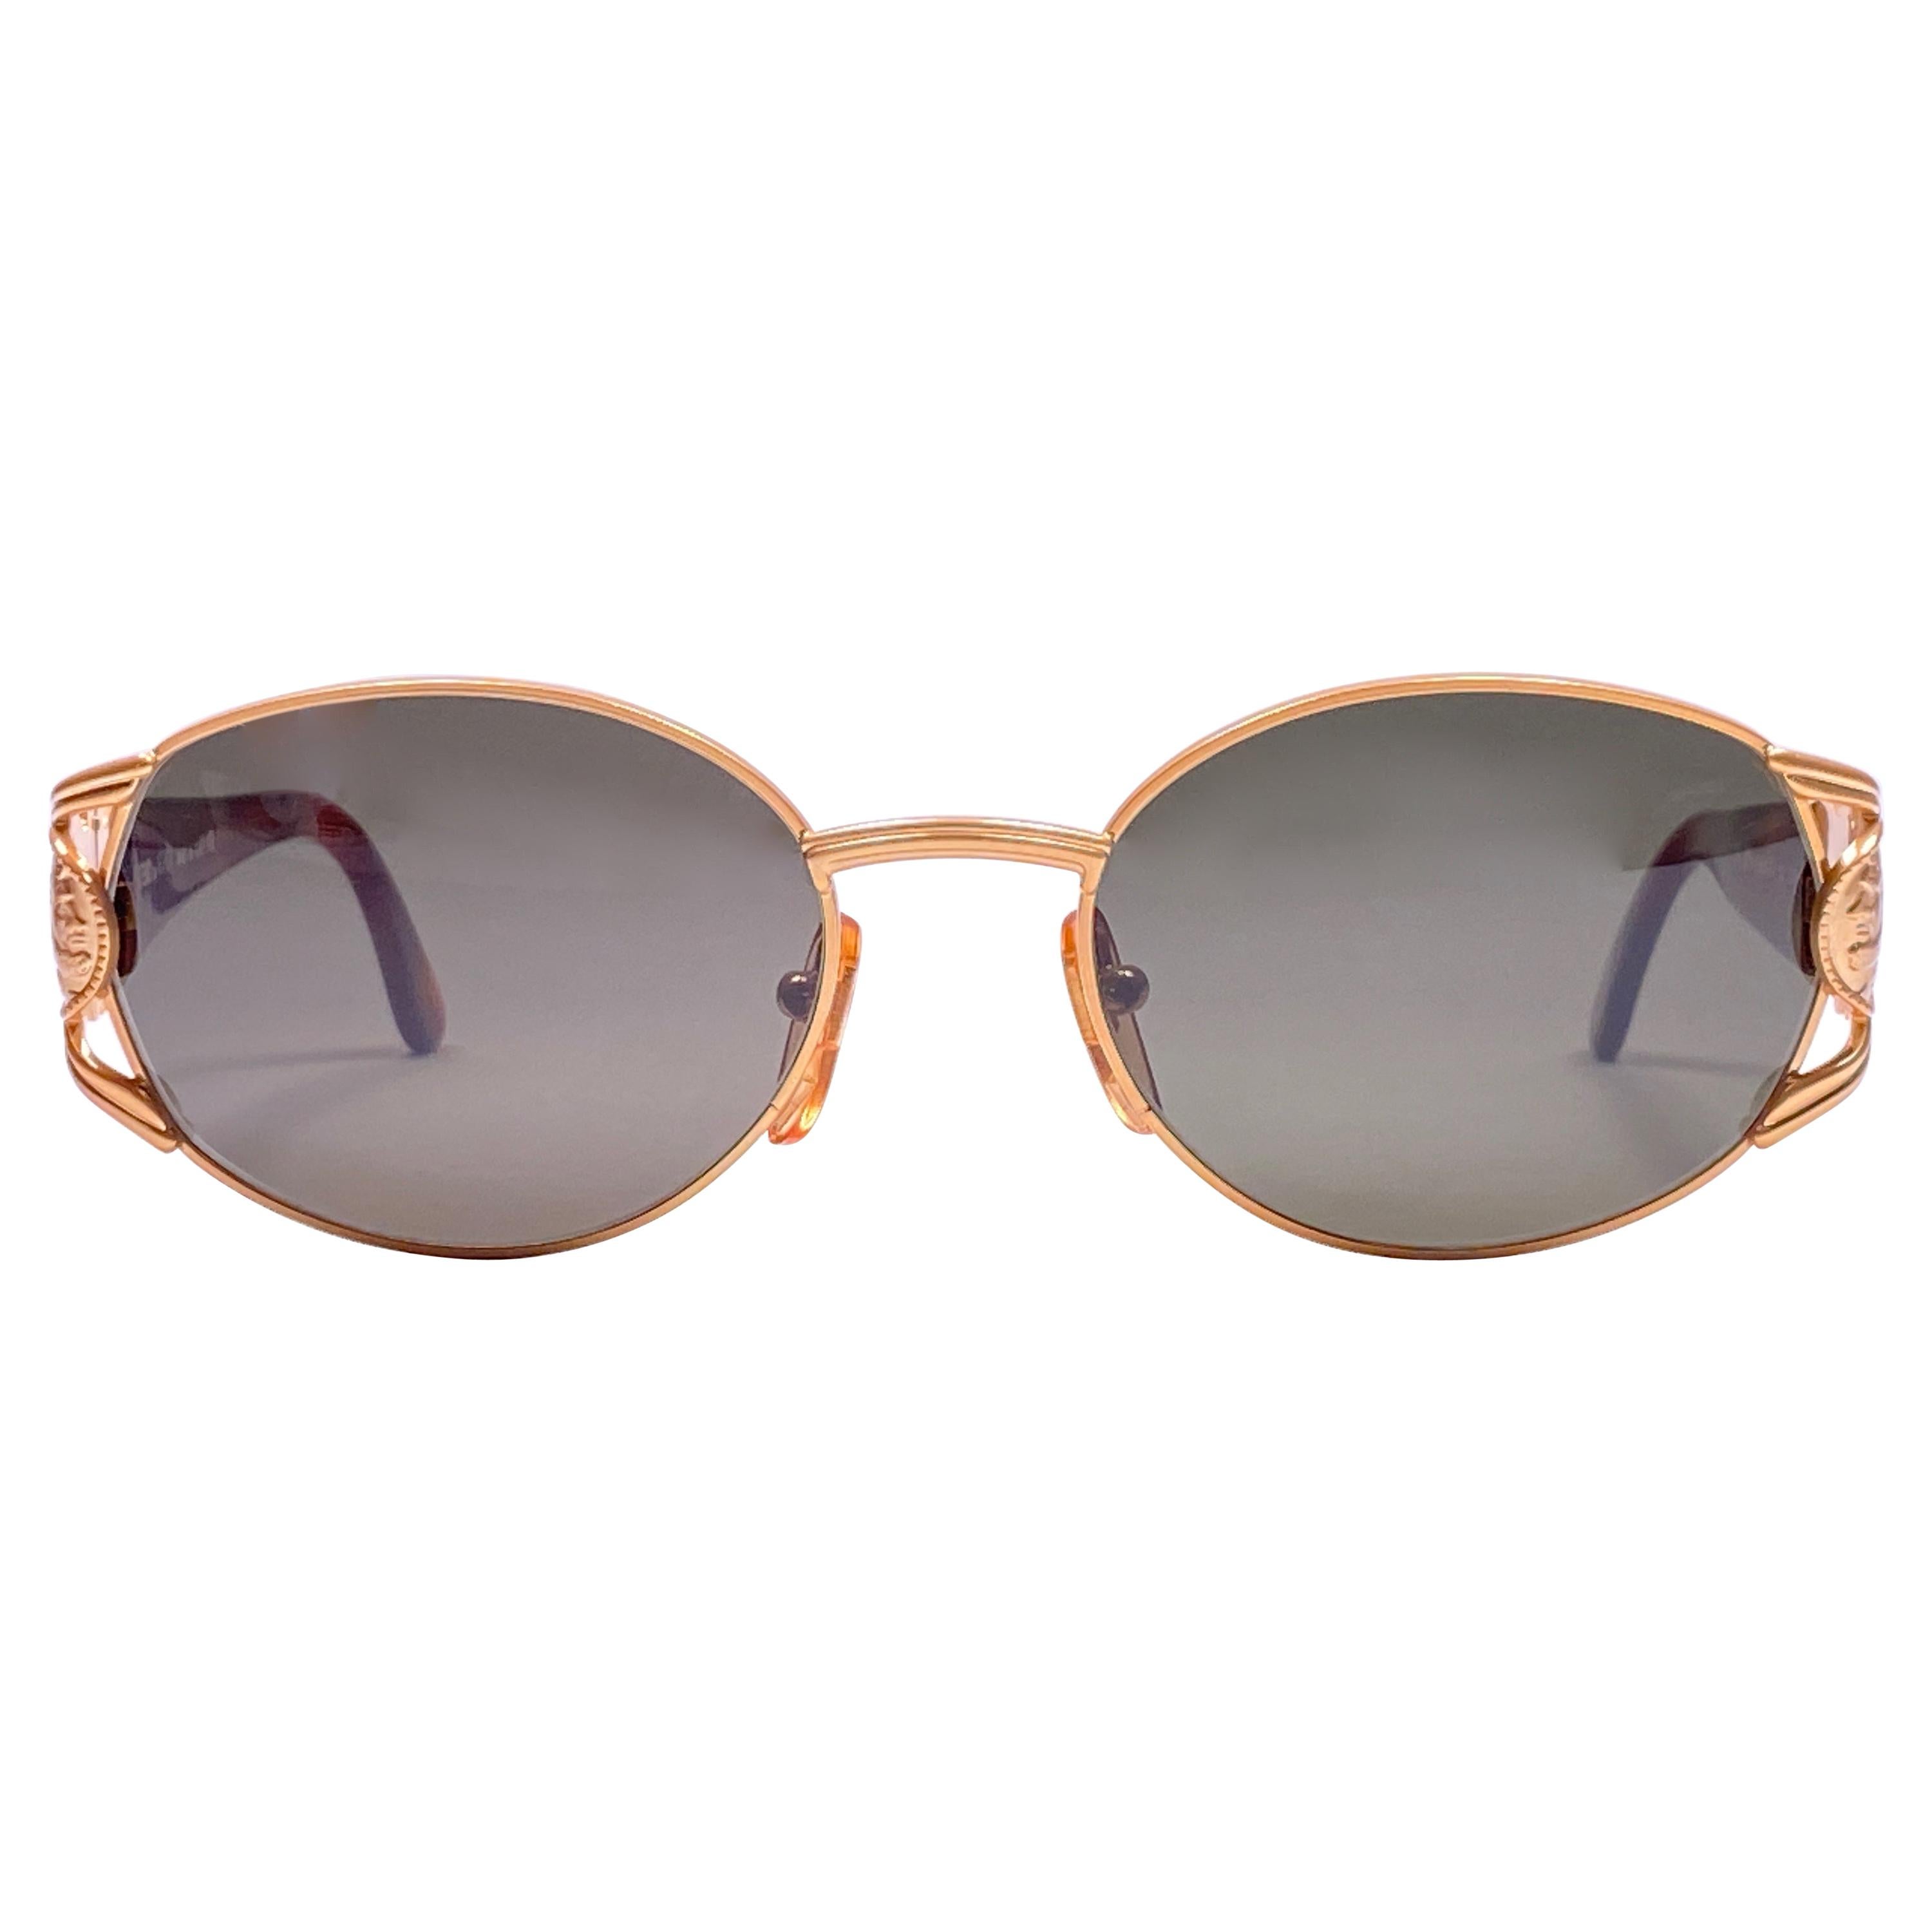 New Vintage Fendi FS296 Rose Gold Oval 1990 Sunglasses Made in Italy